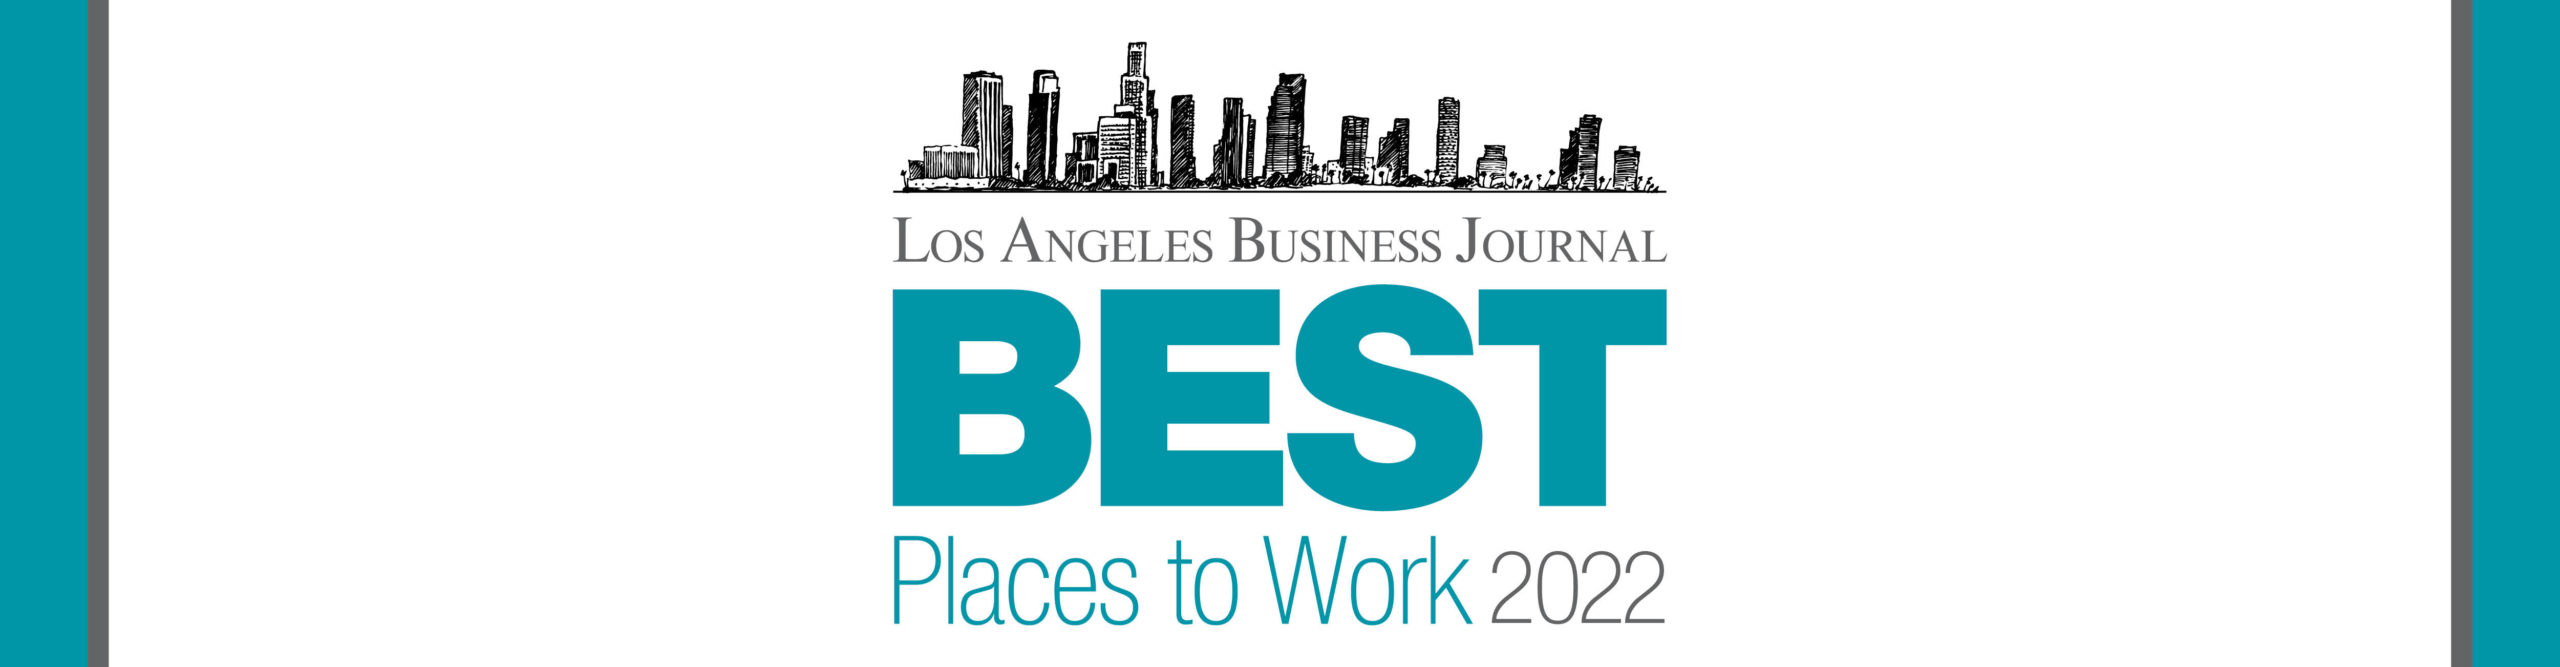 Los Angeles Business Journal Best Places to Work Awards Event Banner